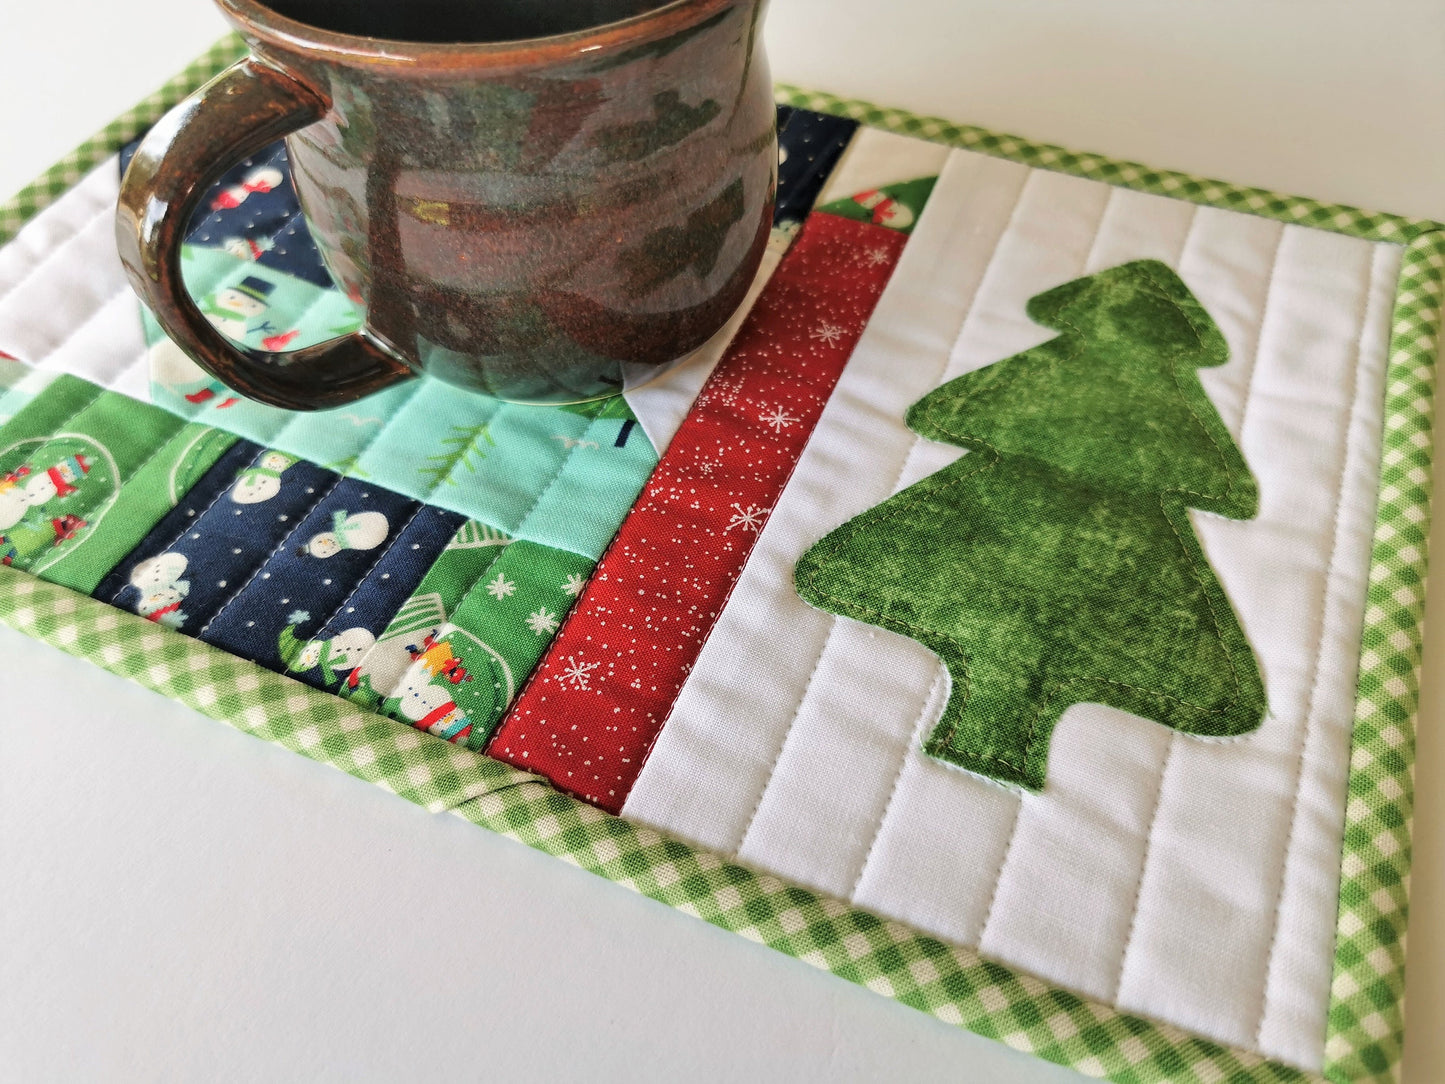 Winter theme fabrics in scrap quilt patchwork are a sweet compliment to the green christmas tree on this holiday snack mat, mug rug.